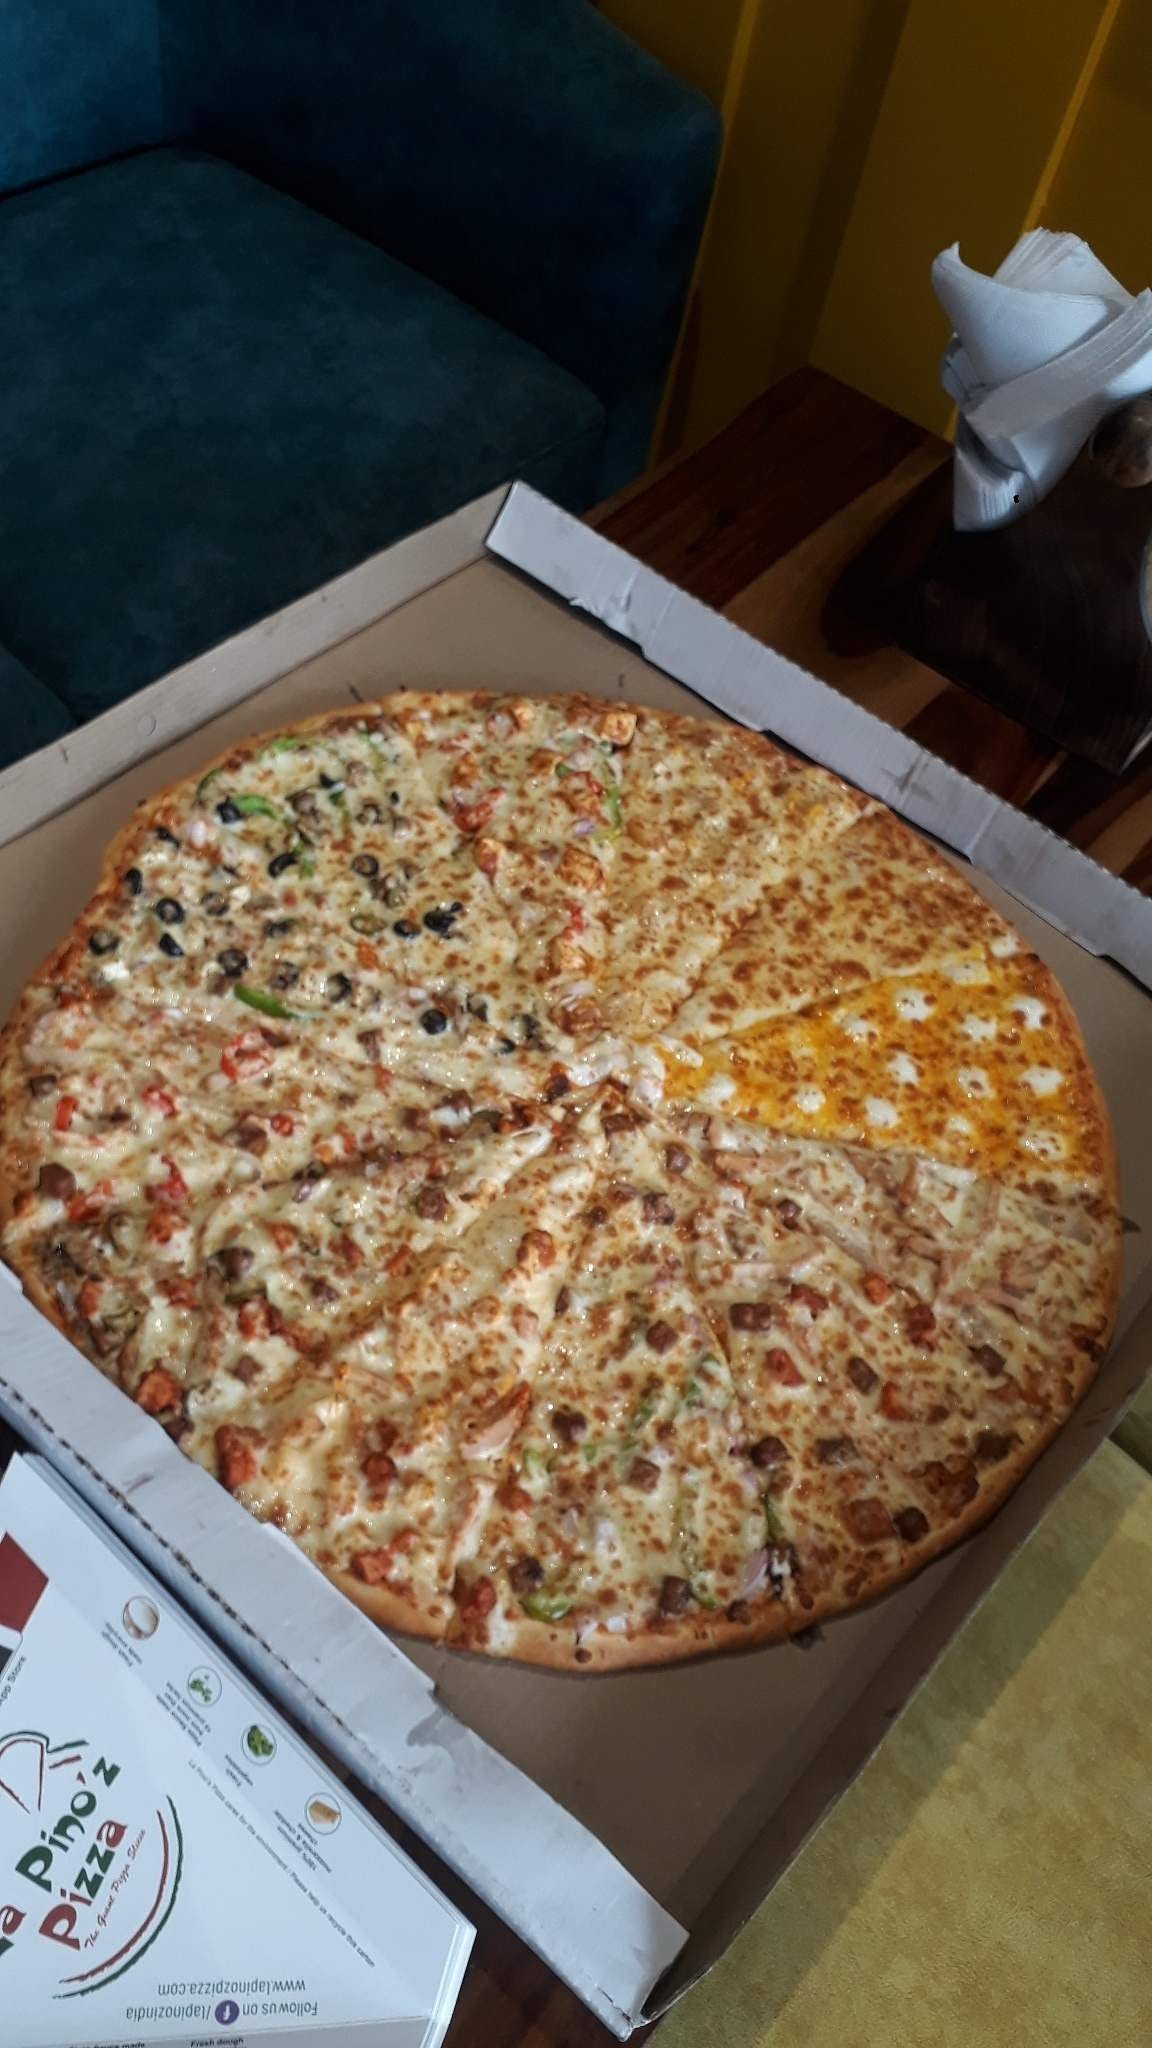 Dig Into This Monster Pizza At This Place